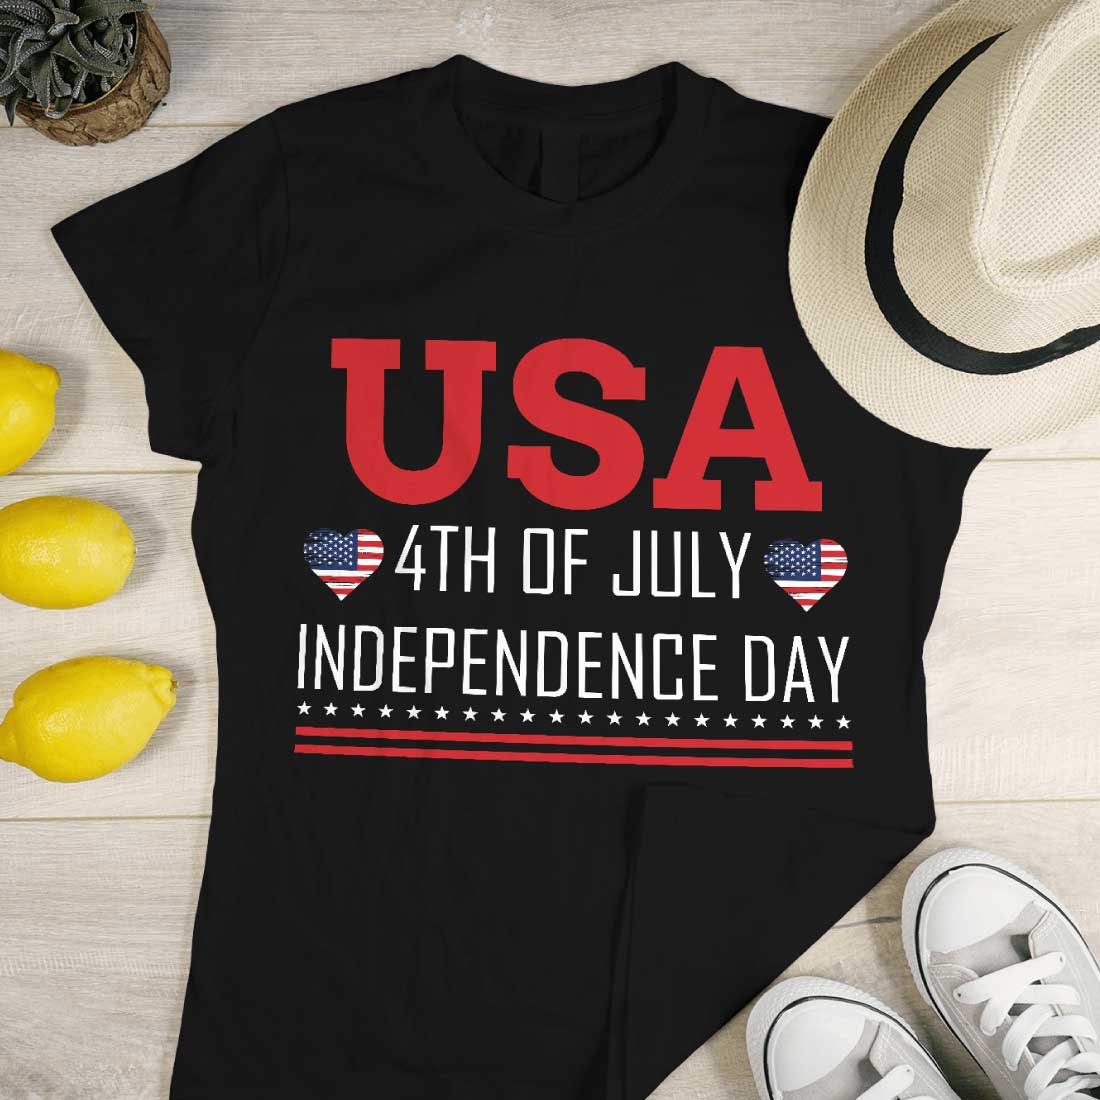 12 Print Ready 4th of July – Independence Day T-Shirt design bundle preview image.